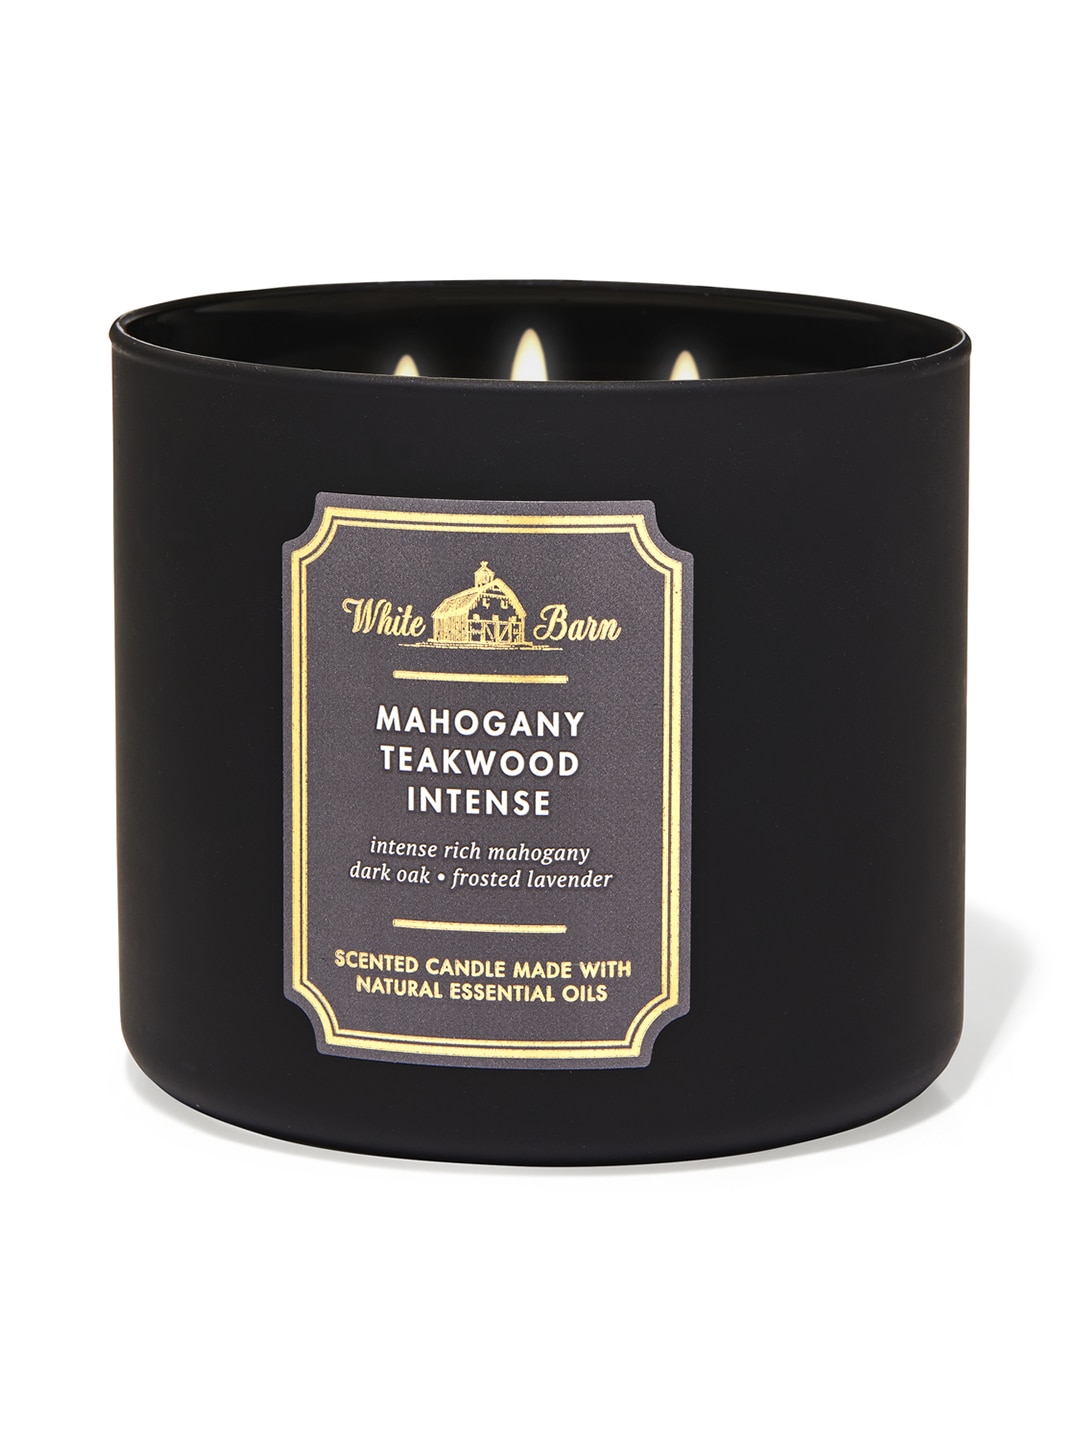 Bath & Body Works Mahogany Teakwood Intense 3-Wick Scented Candle - 411g Price in India